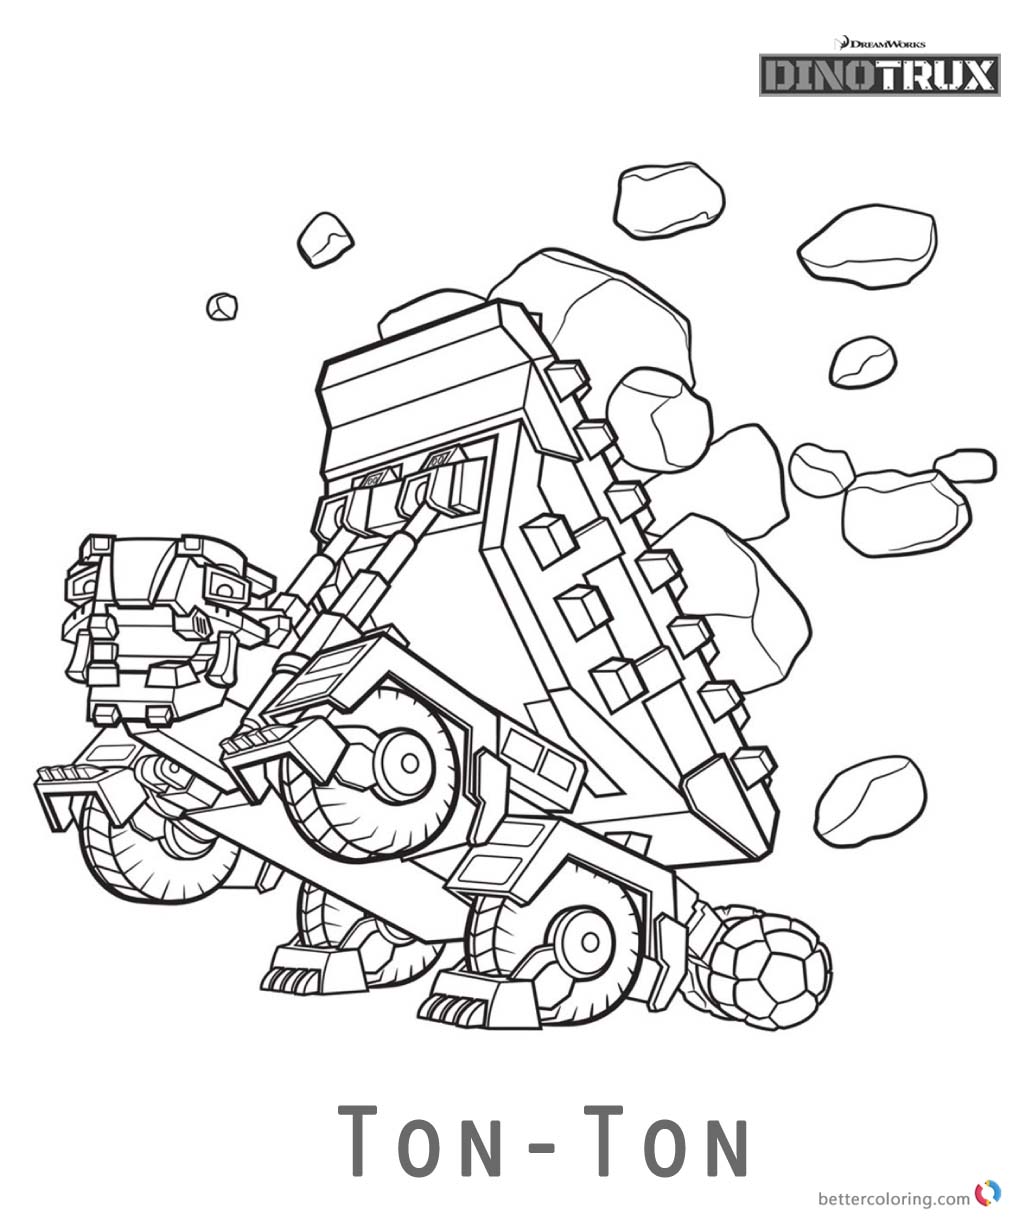 Dinotrux coloring pages Ton-Ton - Free Printable Coloring ...